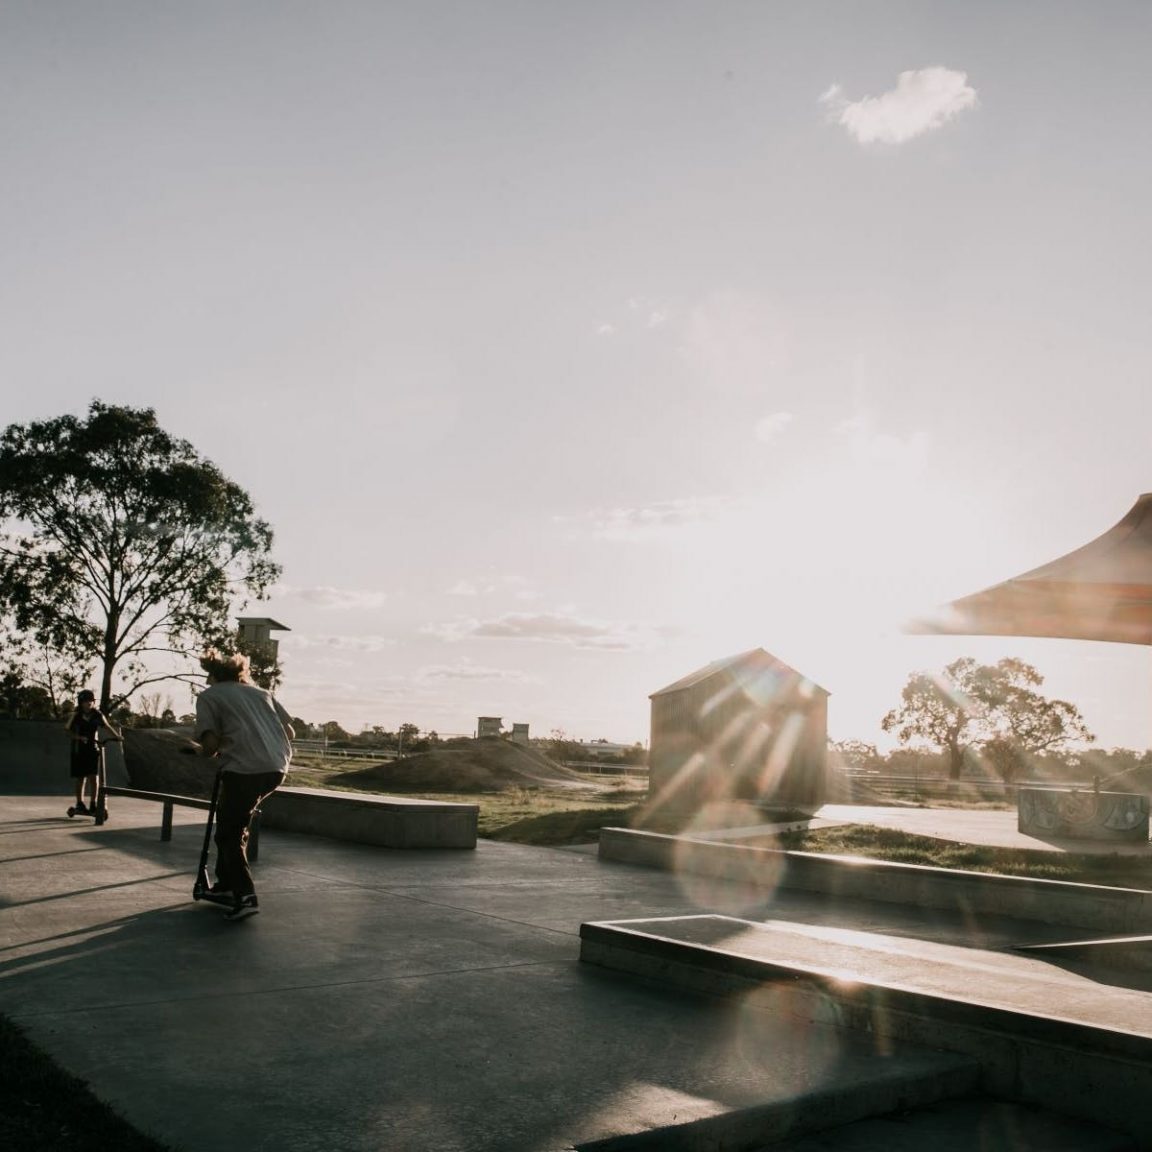 Image of two people on scooters at Horsham Skate Park